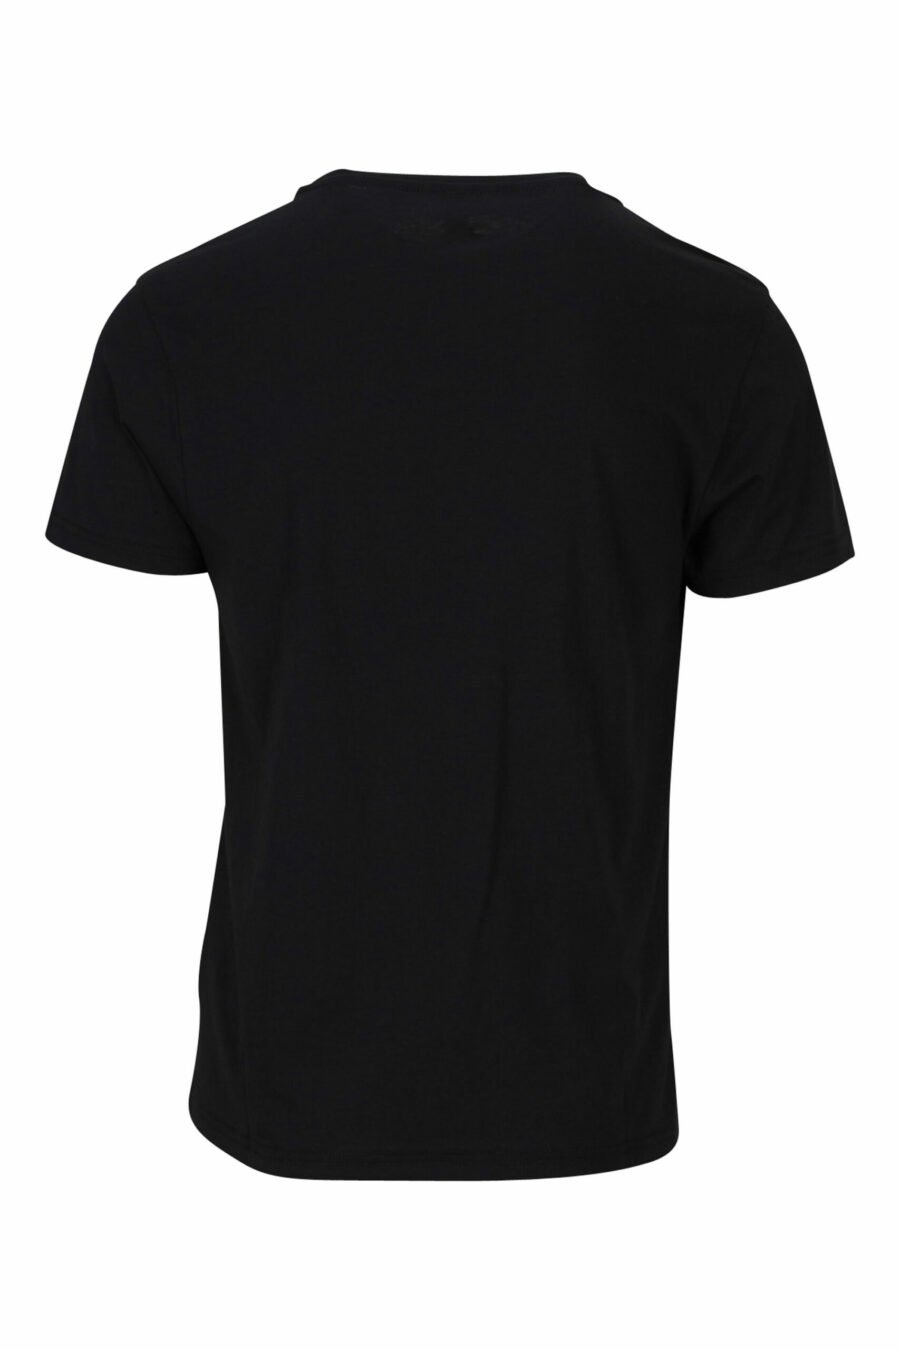 Black T-shirt with monochrome logo tape on shoulders - 889316992724 1 scaled